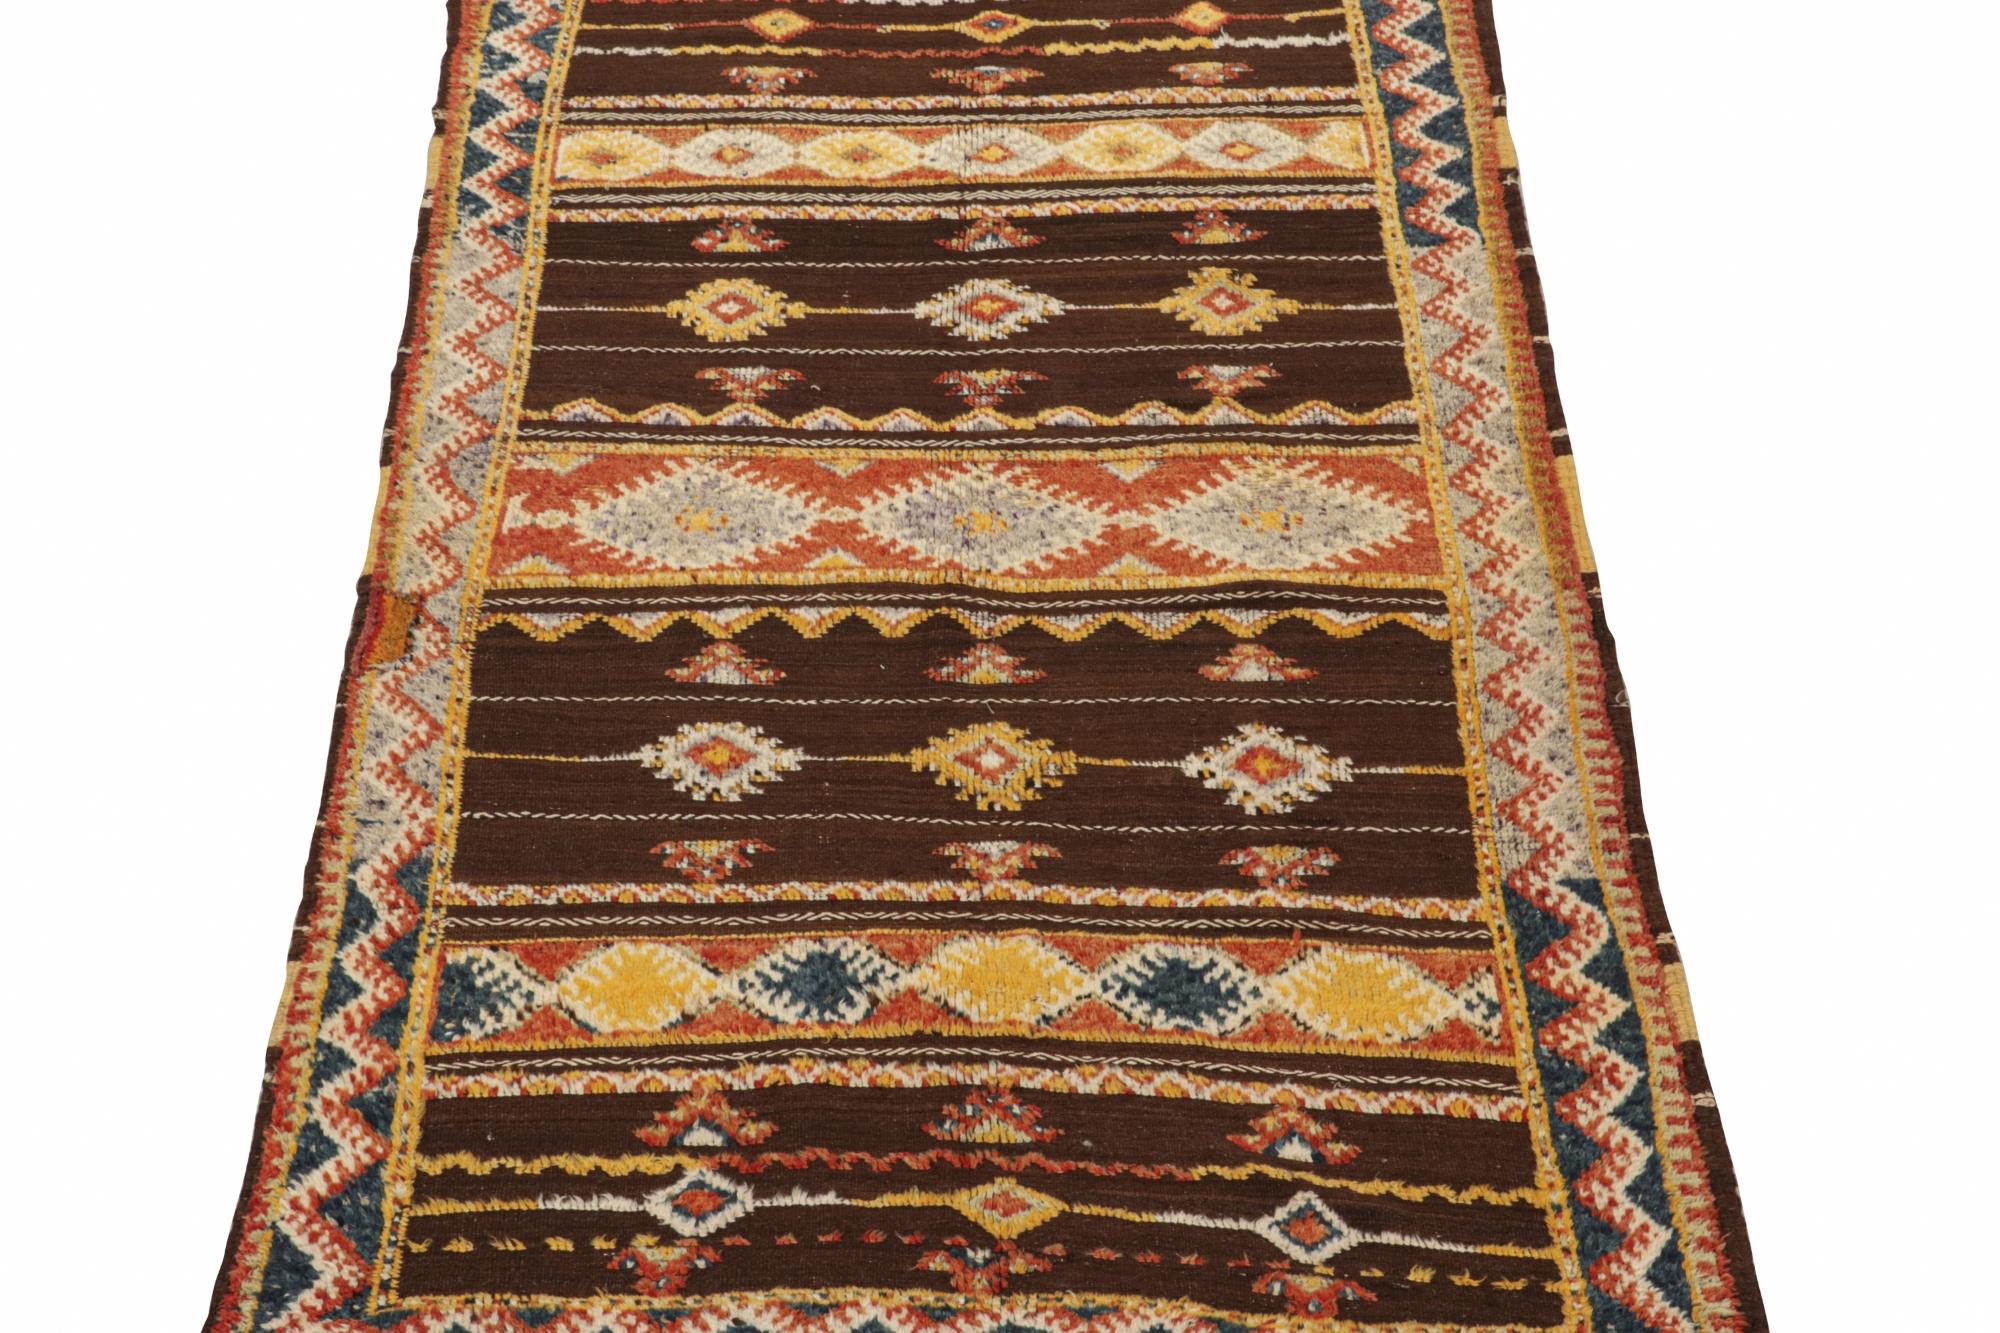 Vintage Moroccan Kilim rug in Brown with Geometric Patterns In Good Condition For Sale In Long Island City, NY